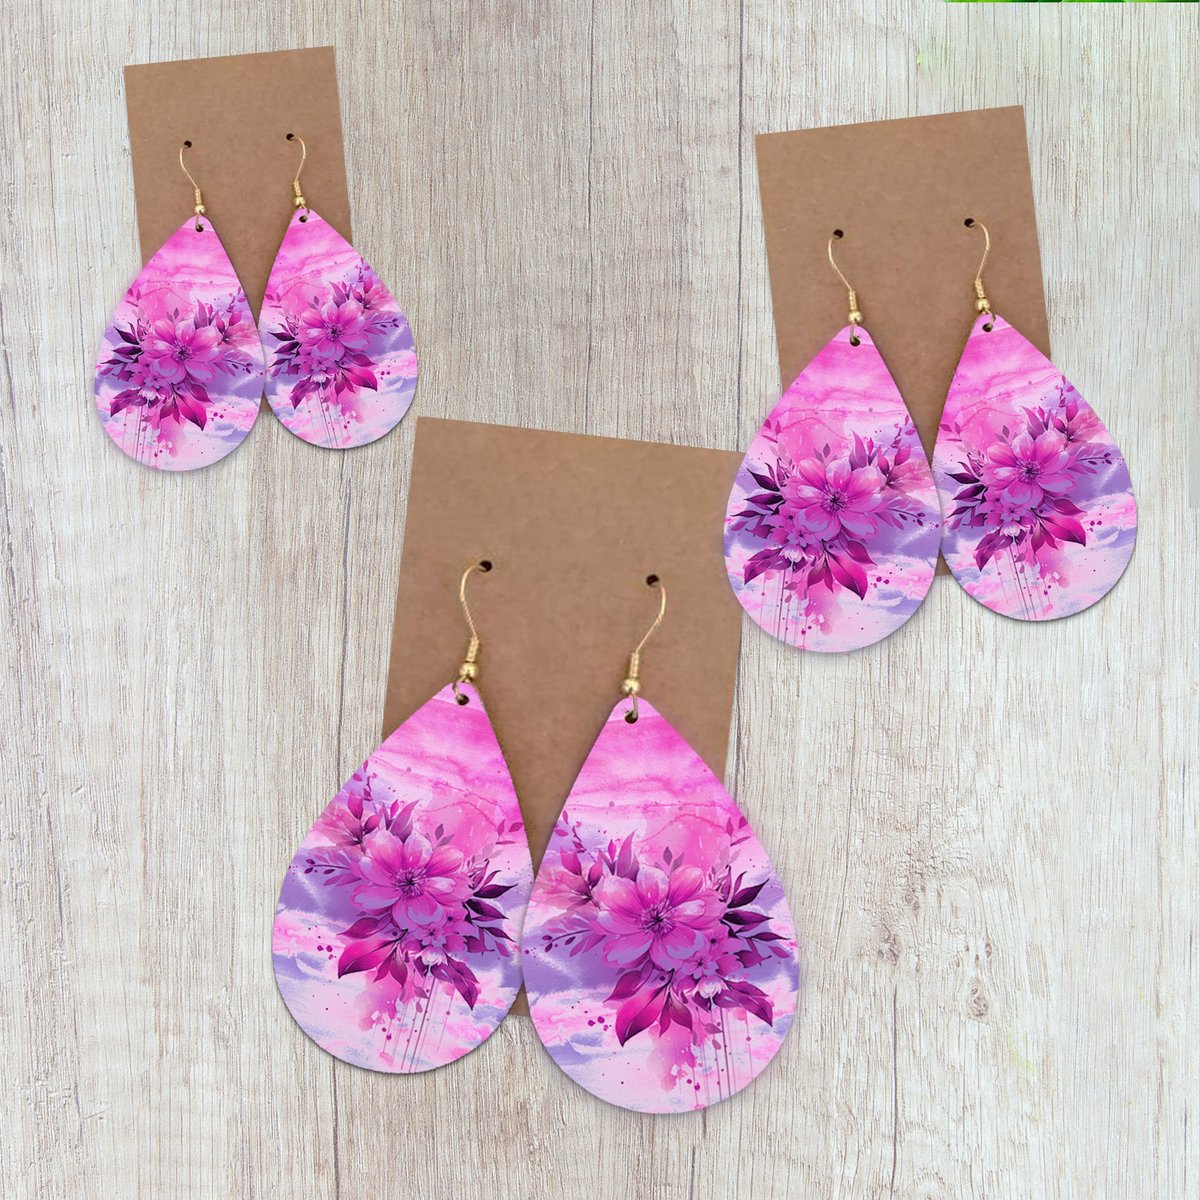 Bring the beauty of spring to your ears with these stunning teardrop earring sublimation designs!

etsy.me/4bLU8U3

#SpringEarrings #SublimationDesigns
#DigitalDownload #EarringPNG #SpringFashion
#giftforher #JewelryDesigns #SublimationArt
#SpringStyle #DigitalCraft #etsy